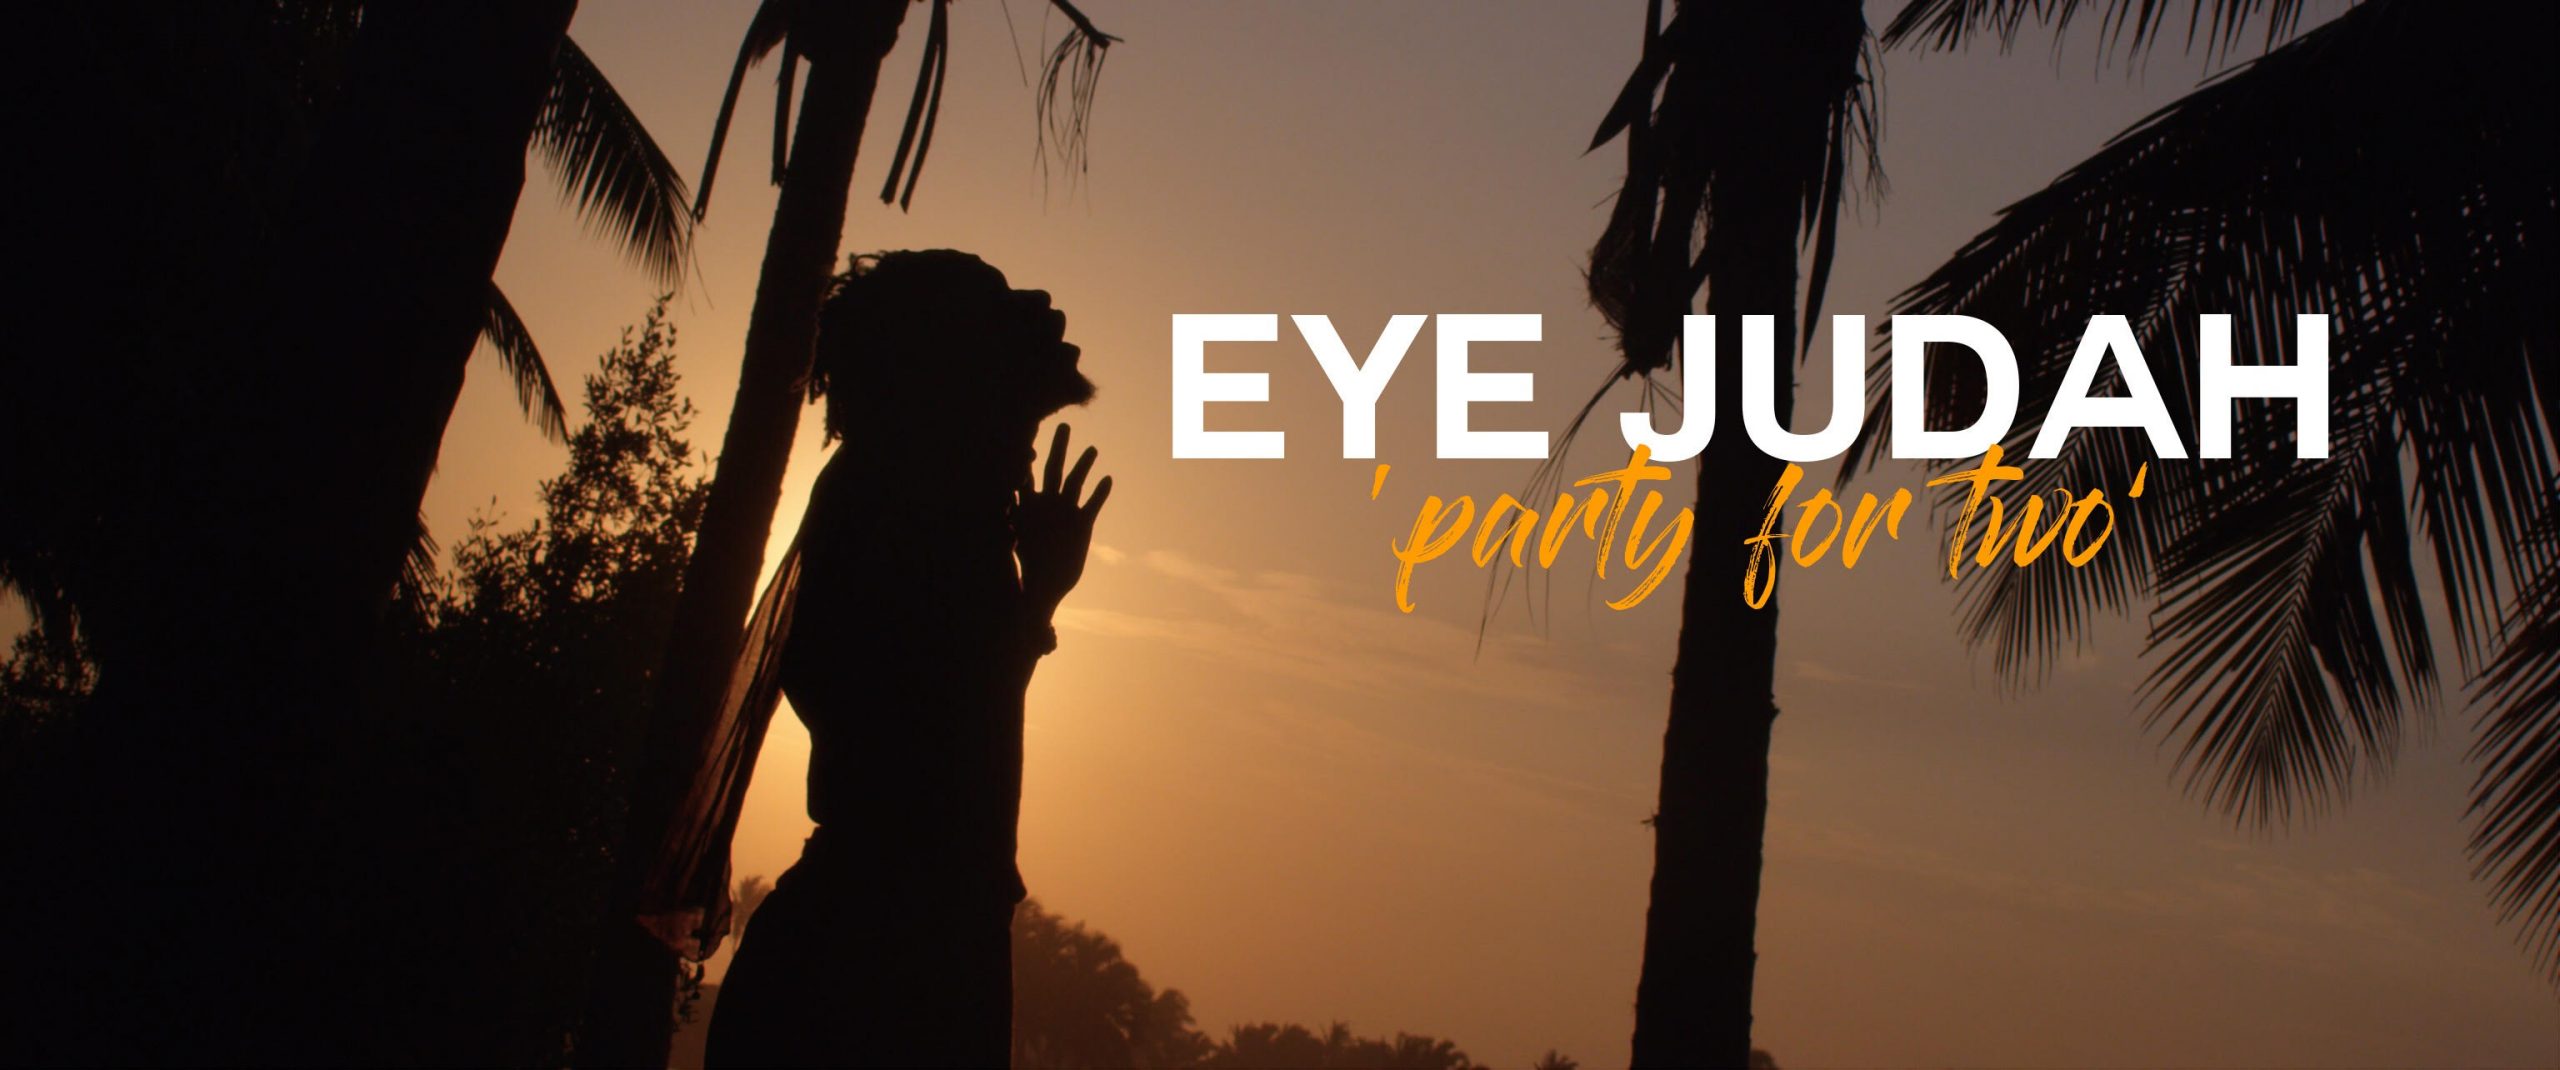 Eye Judah - Party For Two